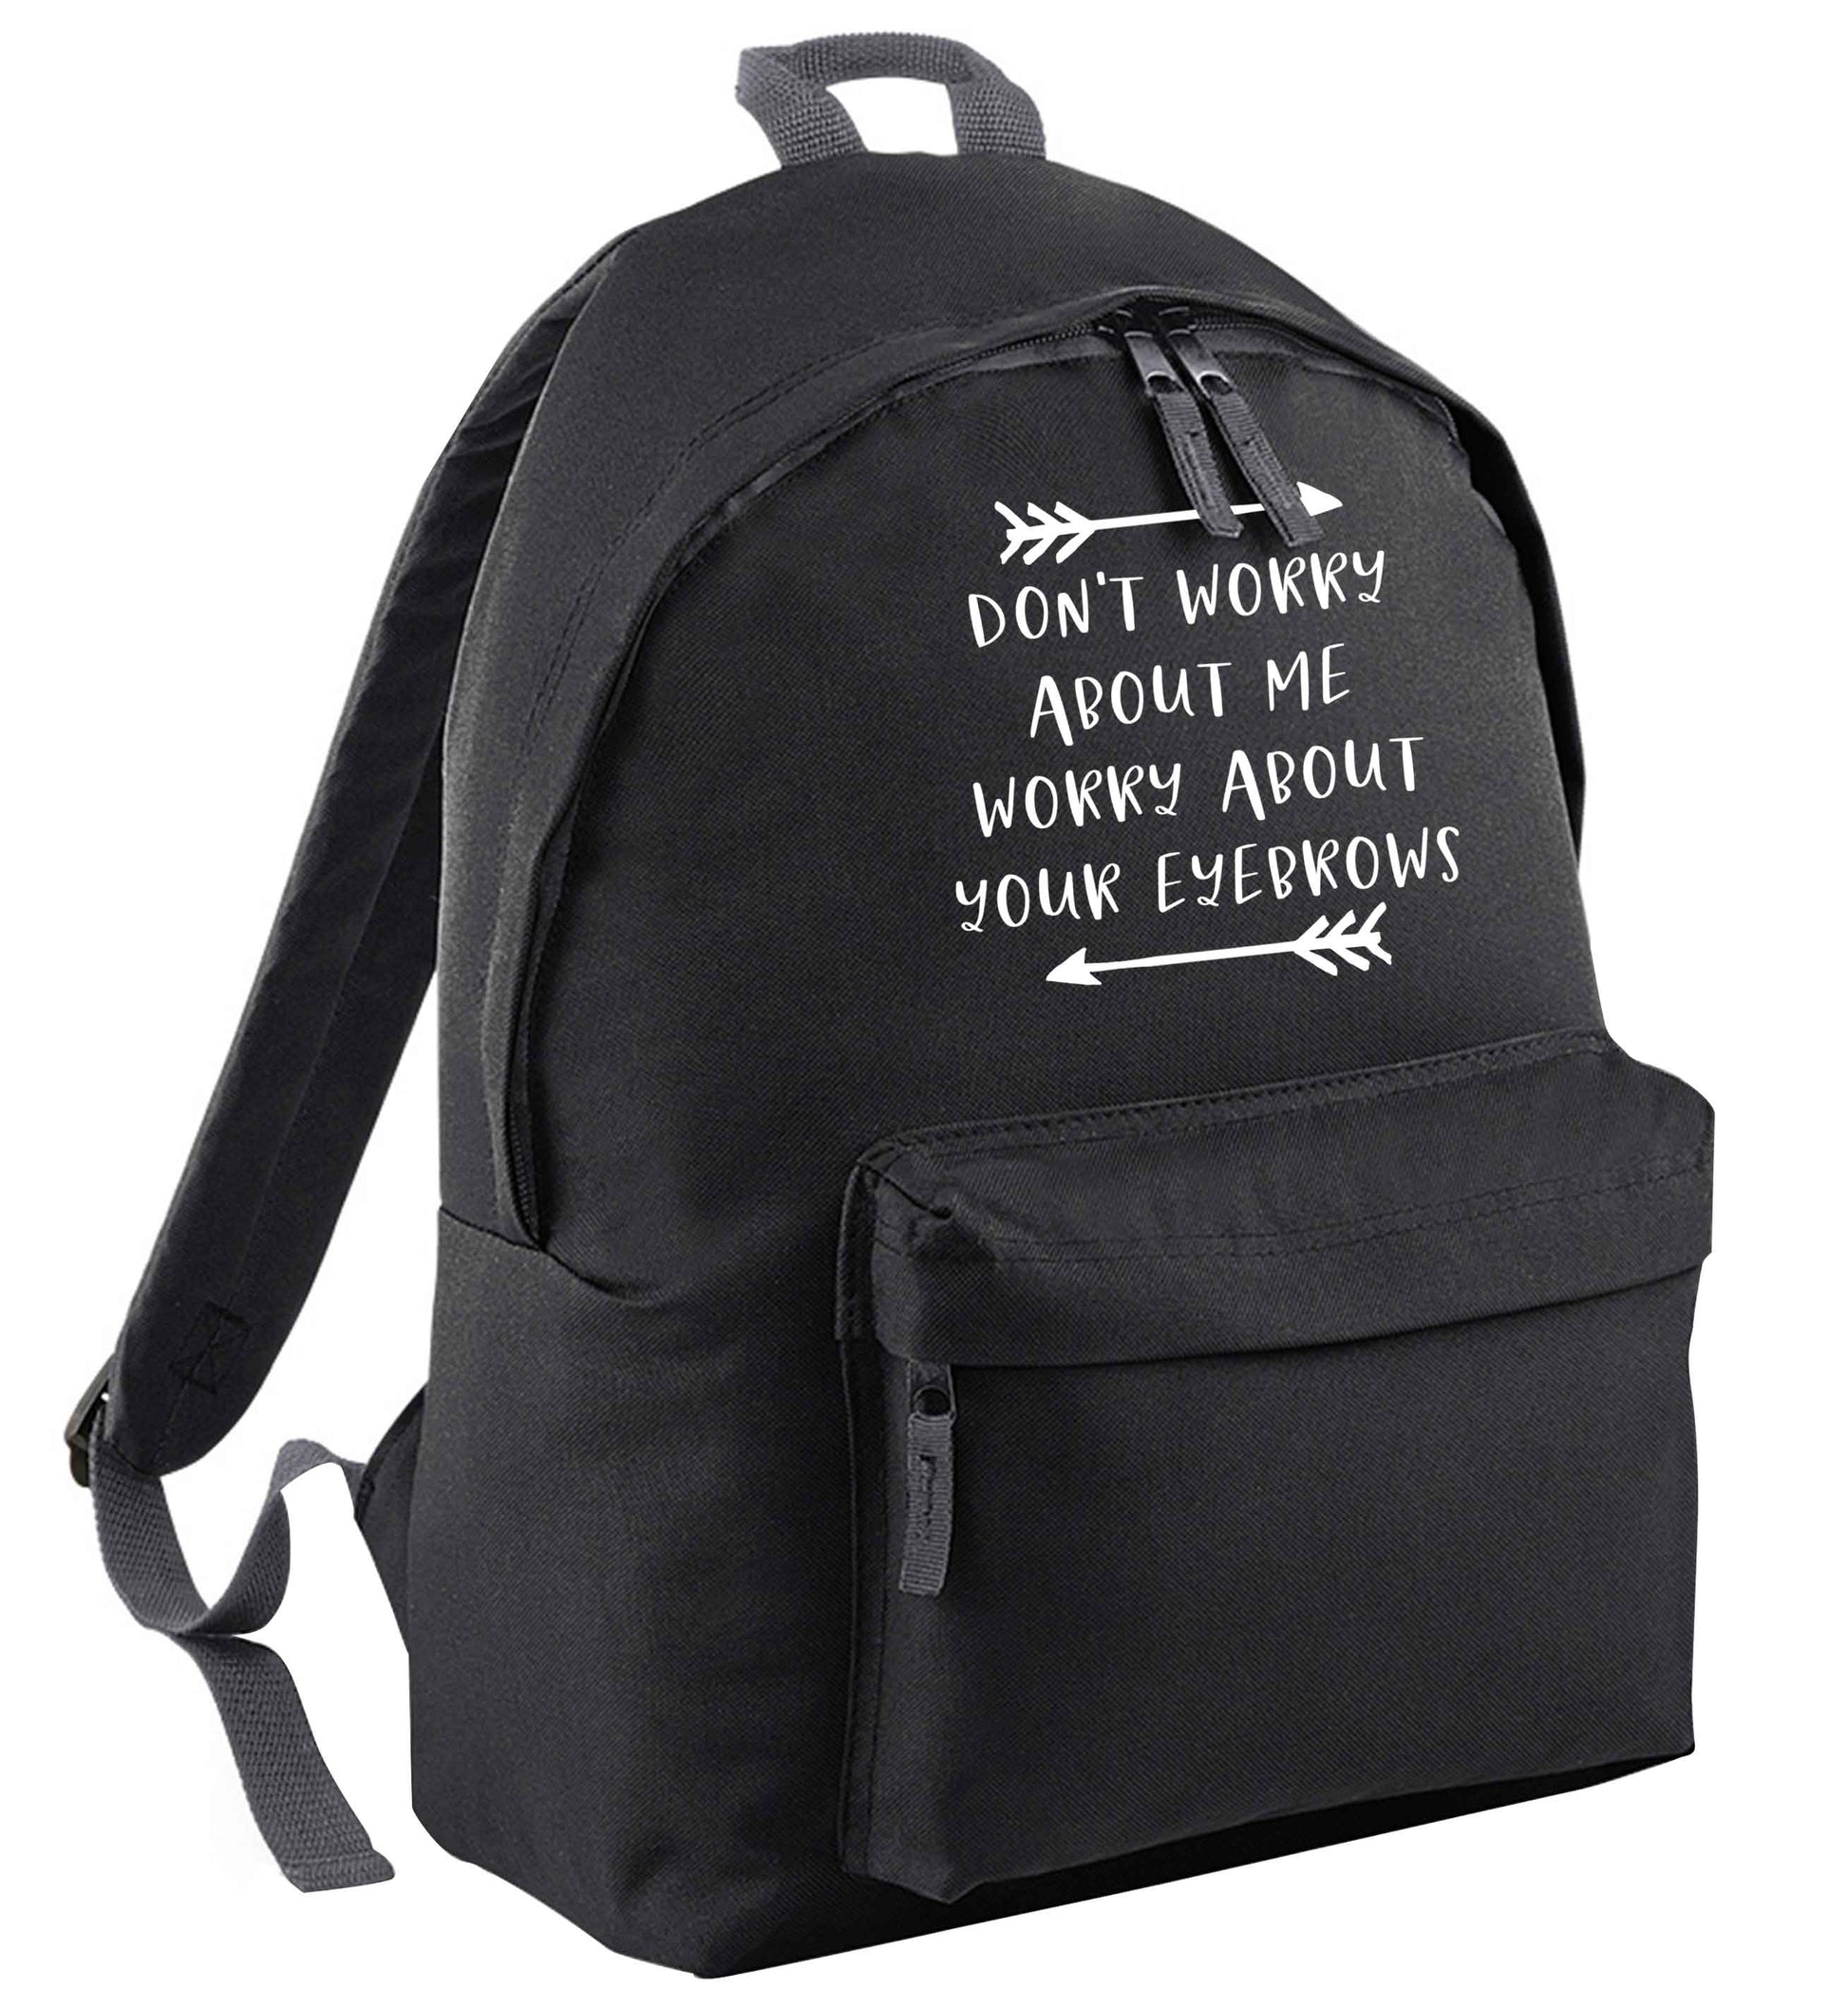 Don't worry about me worry about your eyebrows black adults backpack